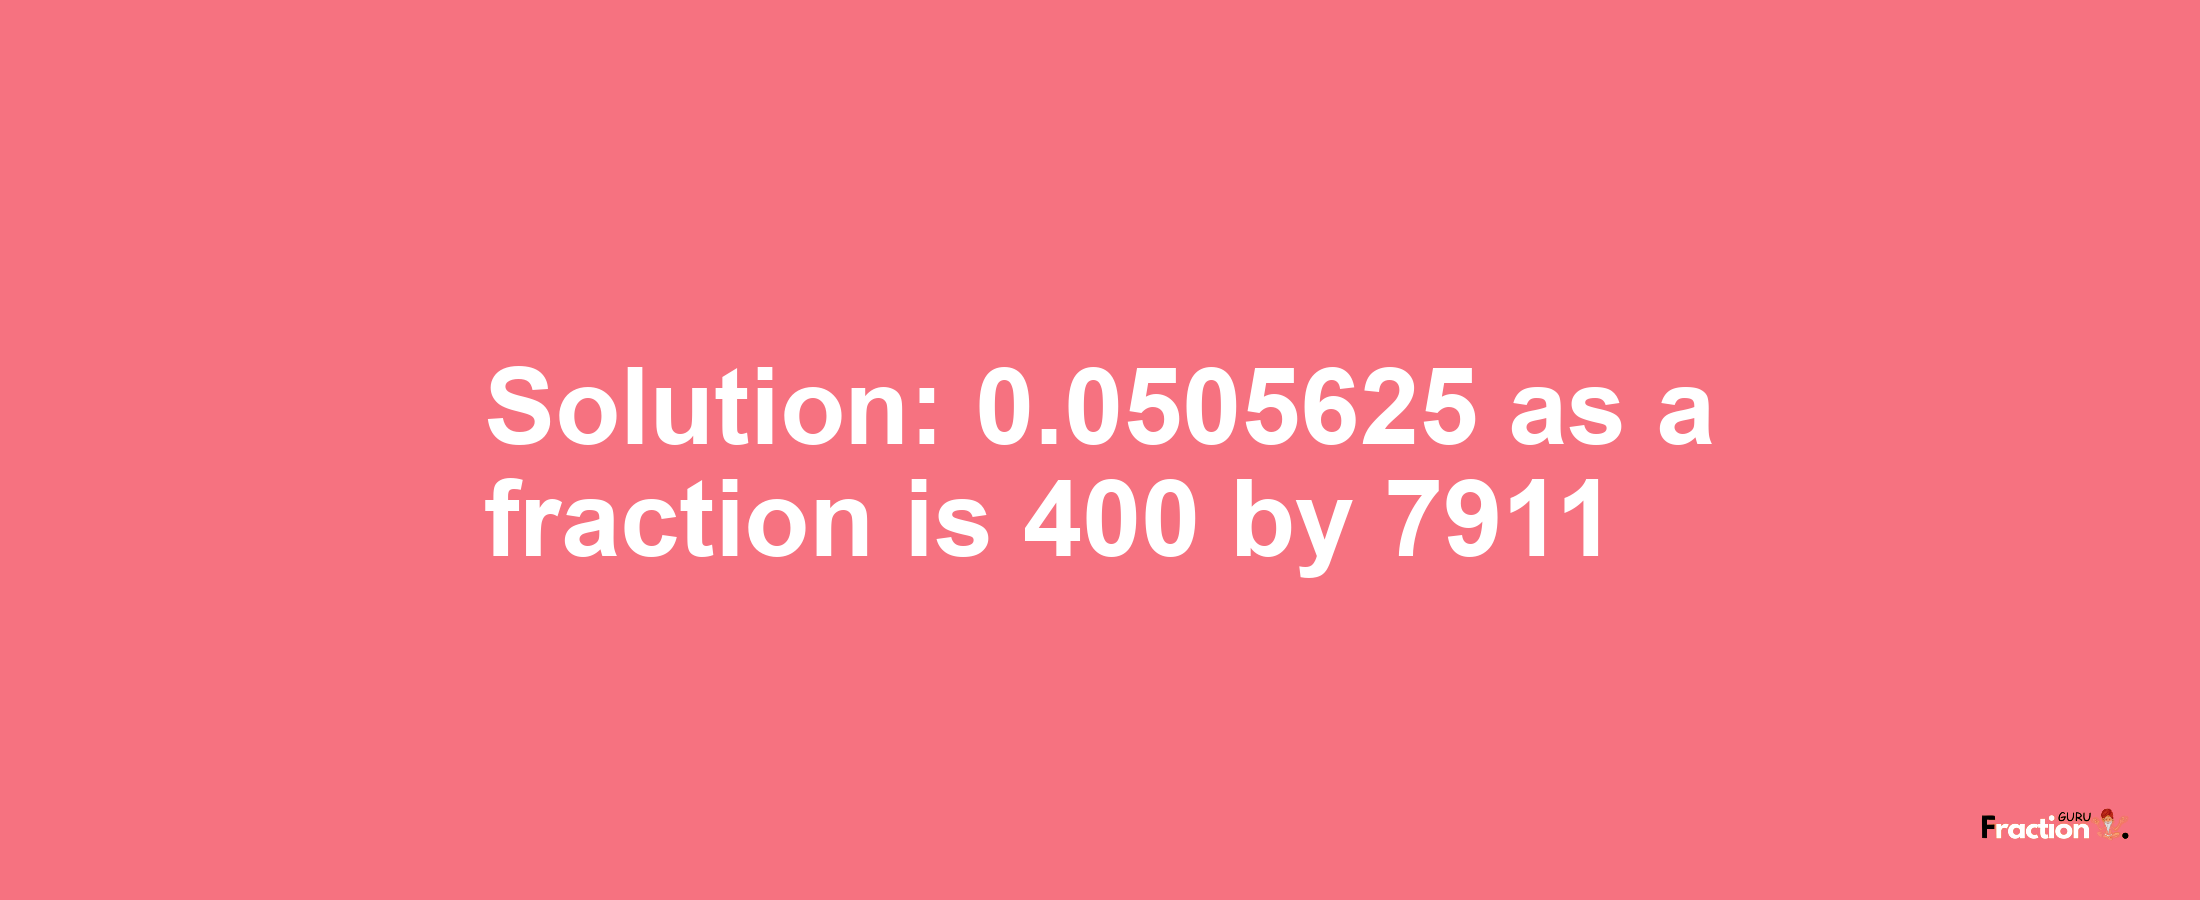 Solution:0.0505625 as a fraction is 400/7911